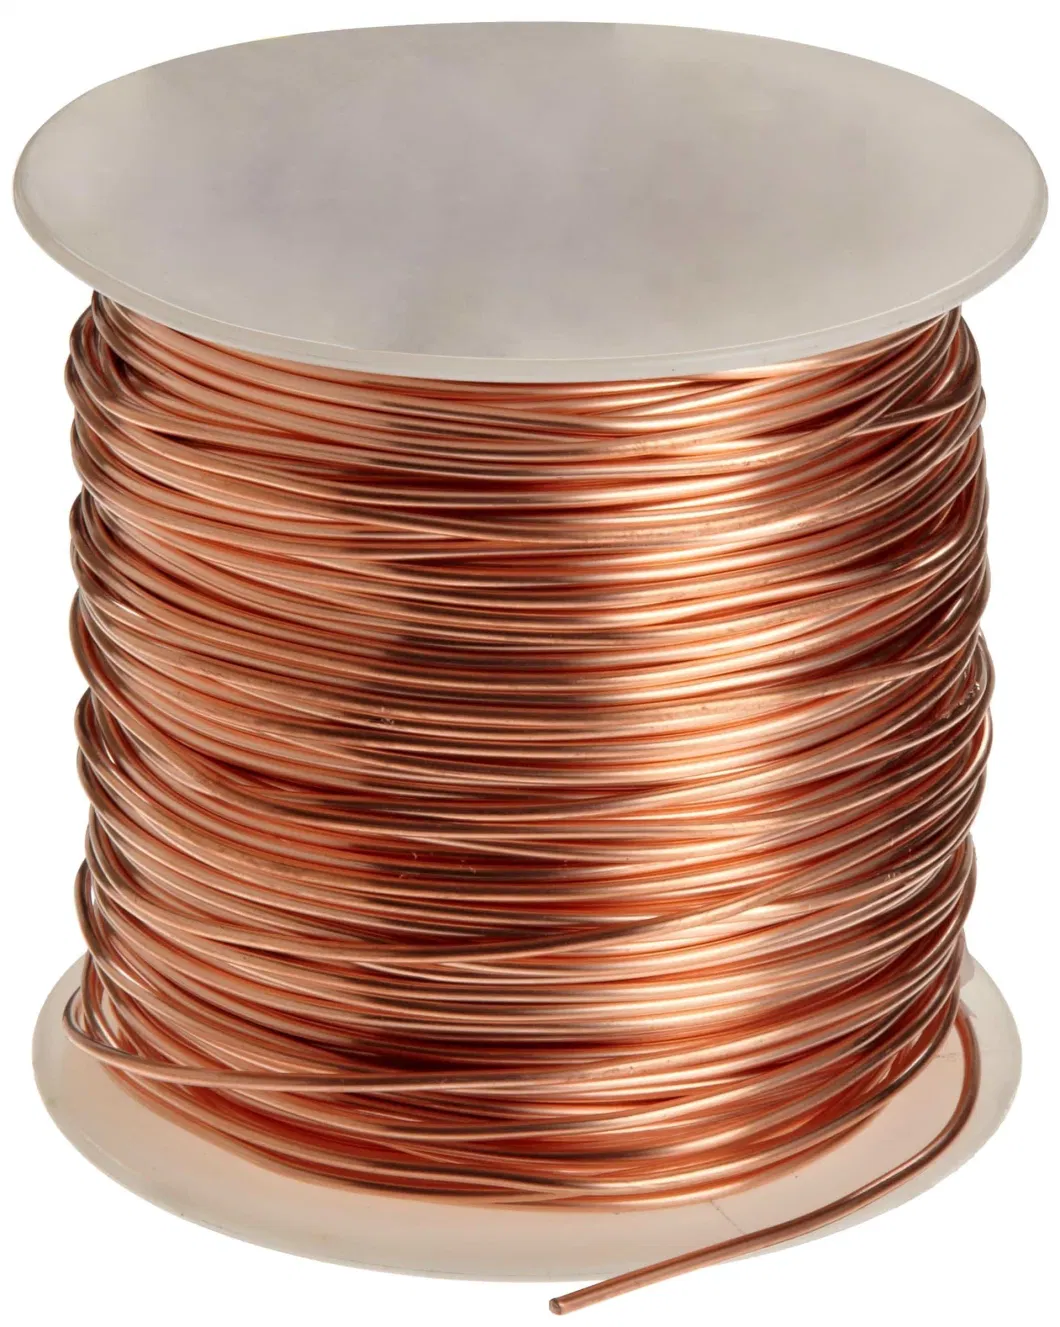 Hot Selling 1.5mm 2.5mm 4mm 6mm 10mm C11000 Copper Wire Single Core Solid or Stranded Copper PVC House Wiring Electrical Cable and Building Wire